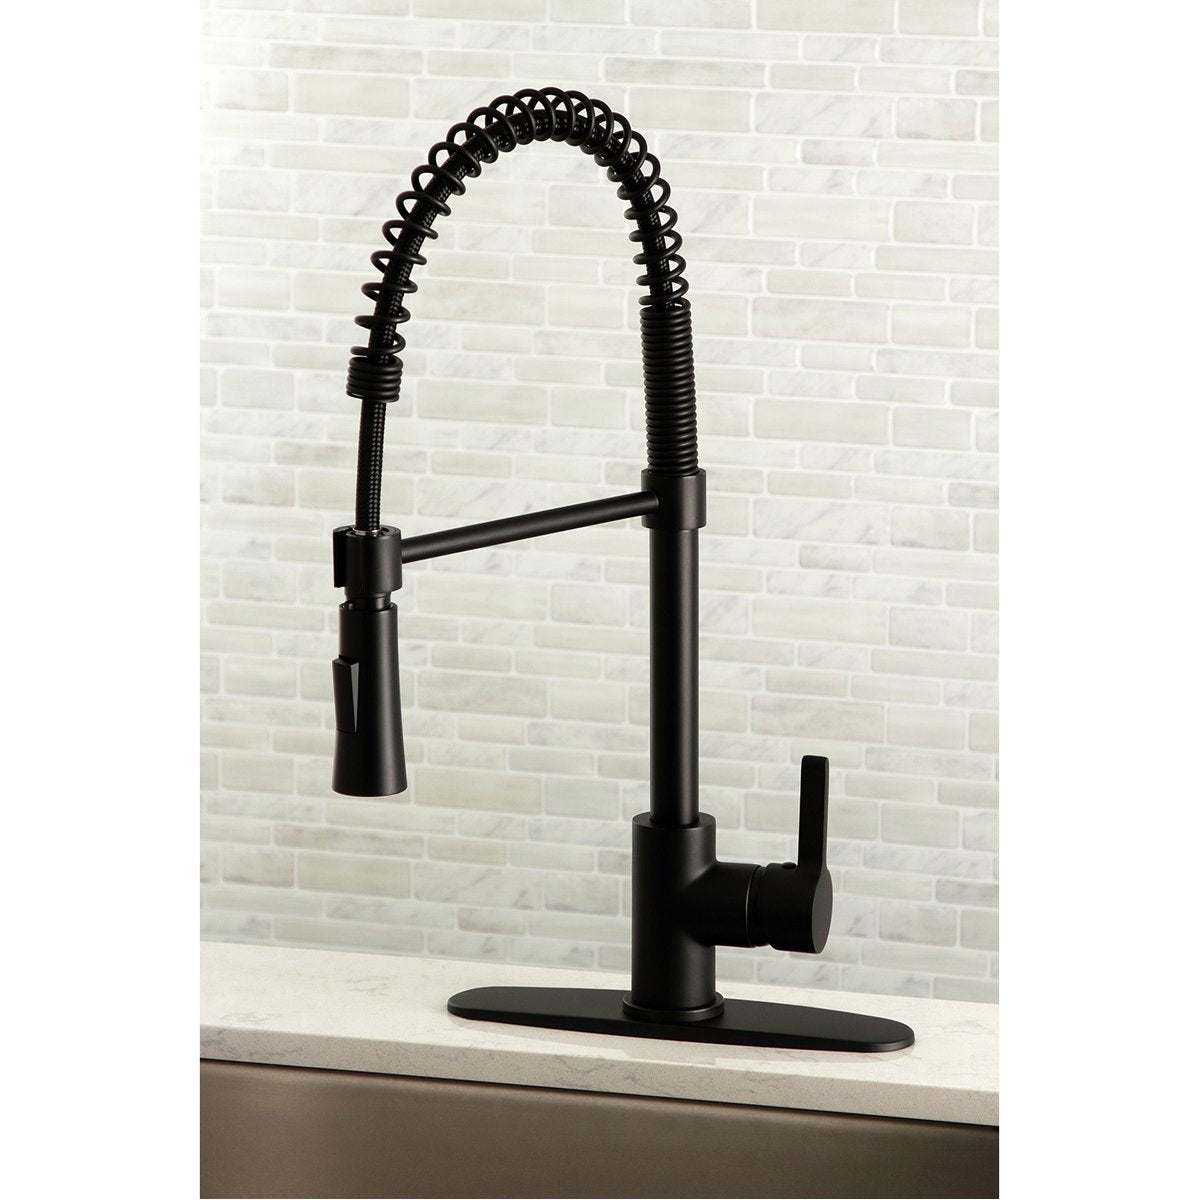 Kingston Brass Gourmetier Continental Single-Handle Pull-Down Kitchen Faucet